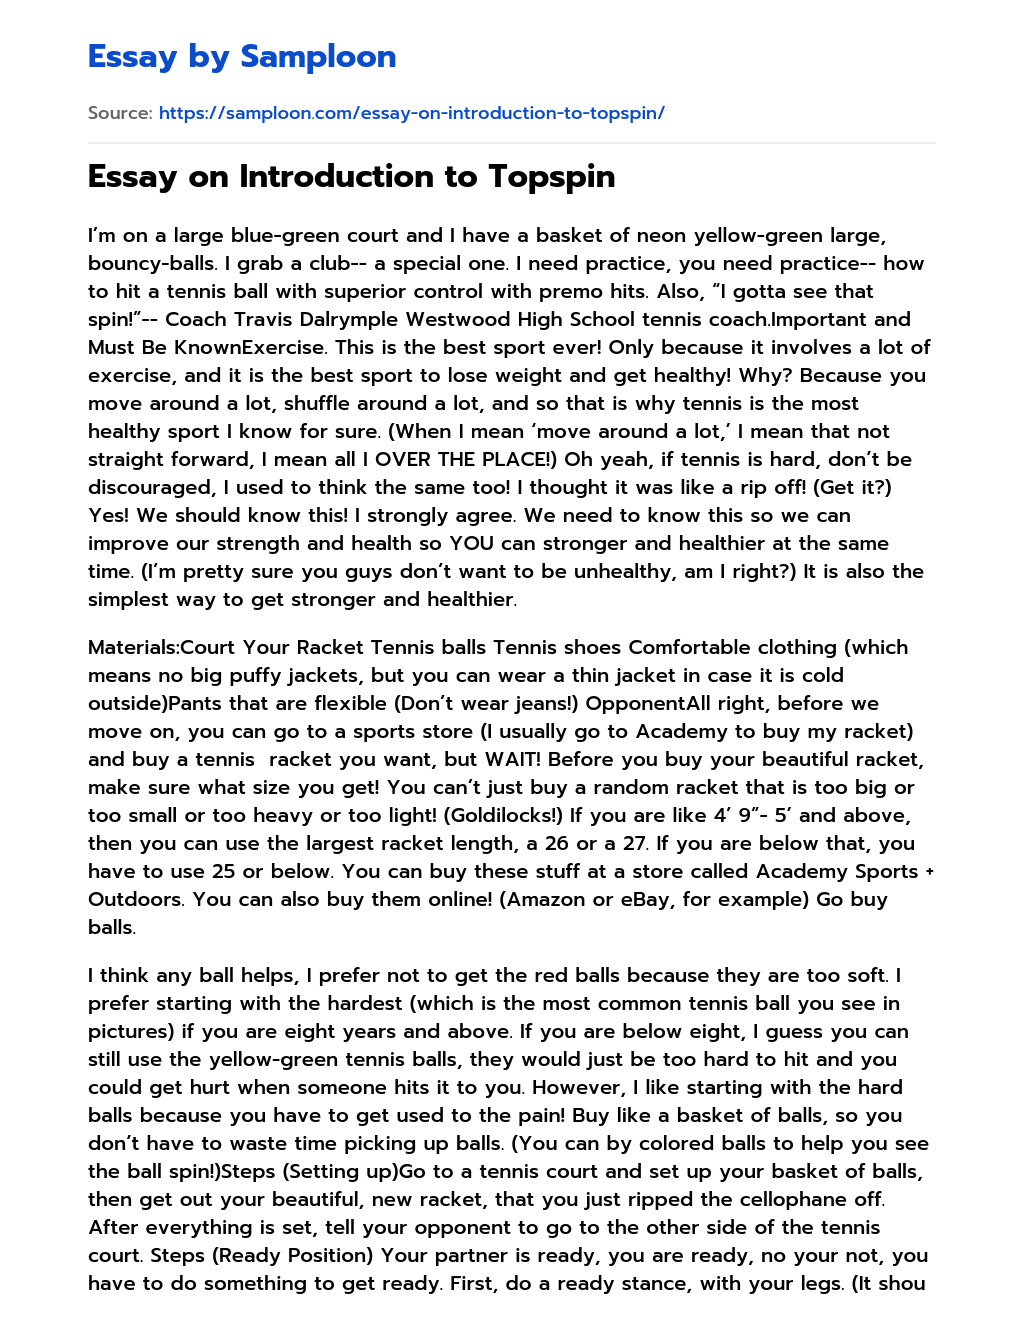 Essay on Introduction to Topspin essay